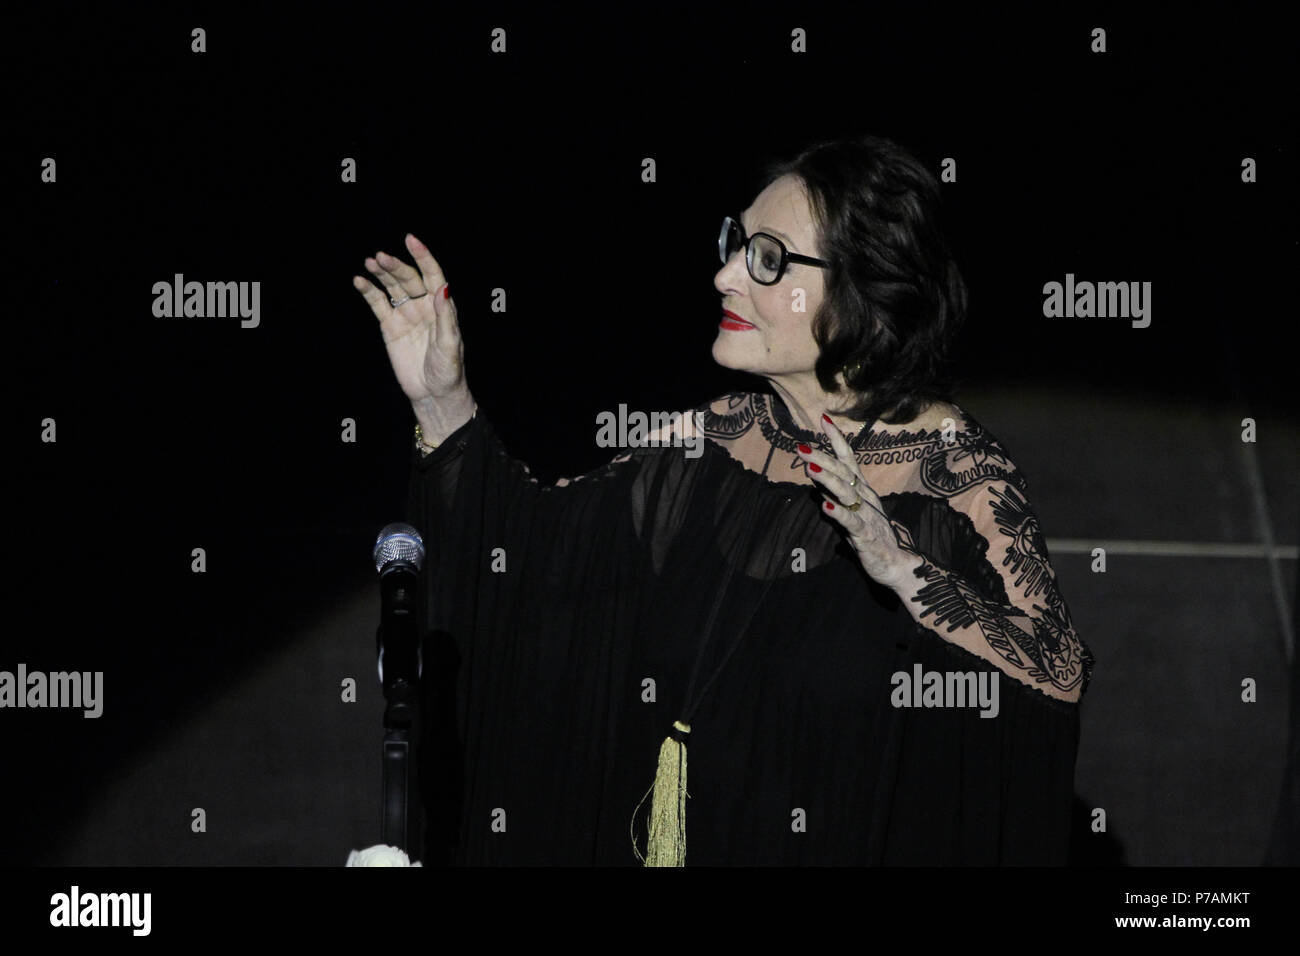 Athens, Greece. 5th July, 2018. Greek singer NANA MOUSKOURI in concert at the Odeon of Herodes Atticus in Athens. Credit: Aristidis Vafeiadakis/ZUMA Wire/Alamy Live News Stock Photo